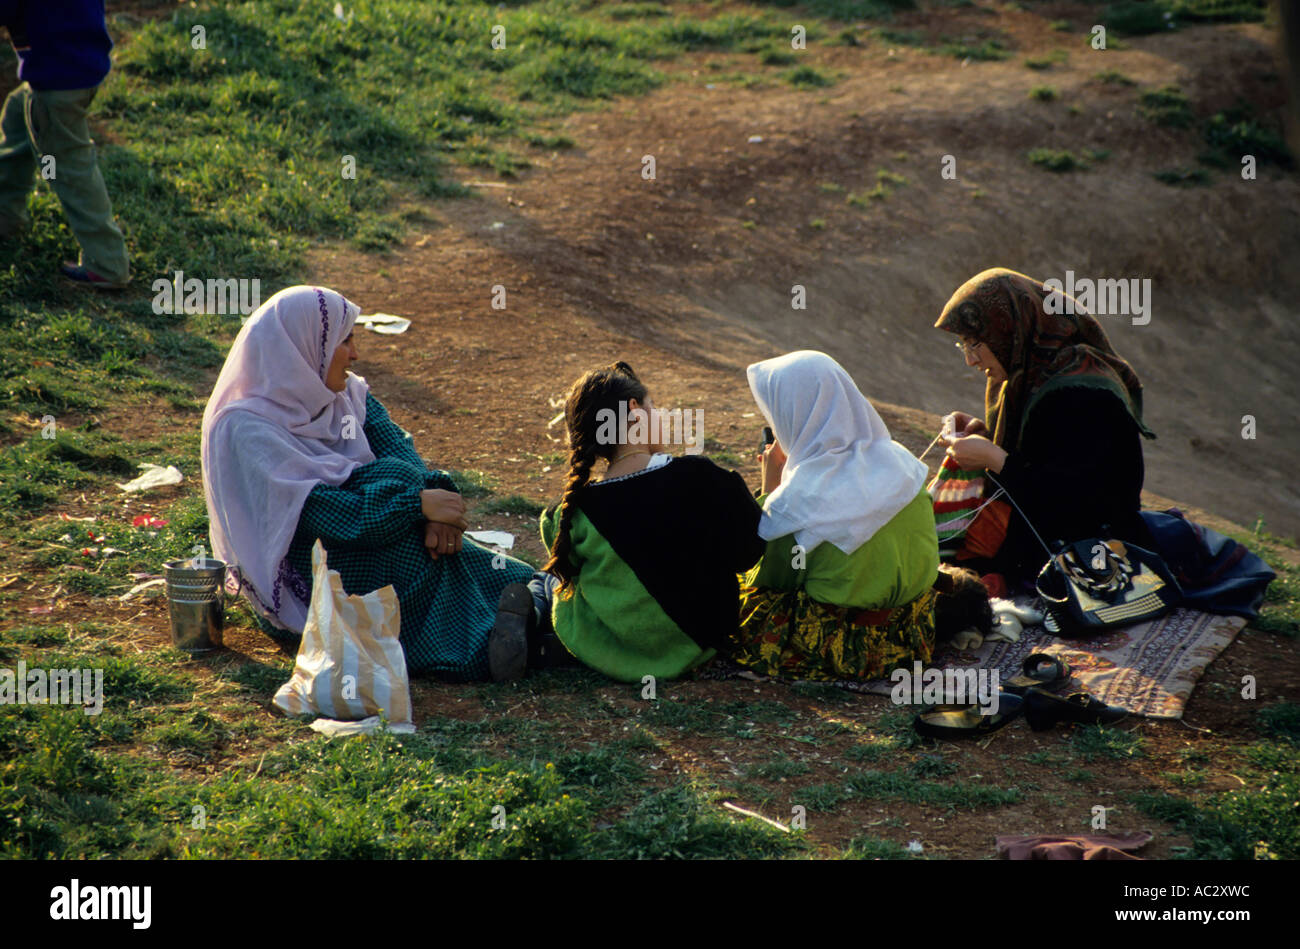 Syria aleppo alep four girls and women having rest on a lawn Stock Photo